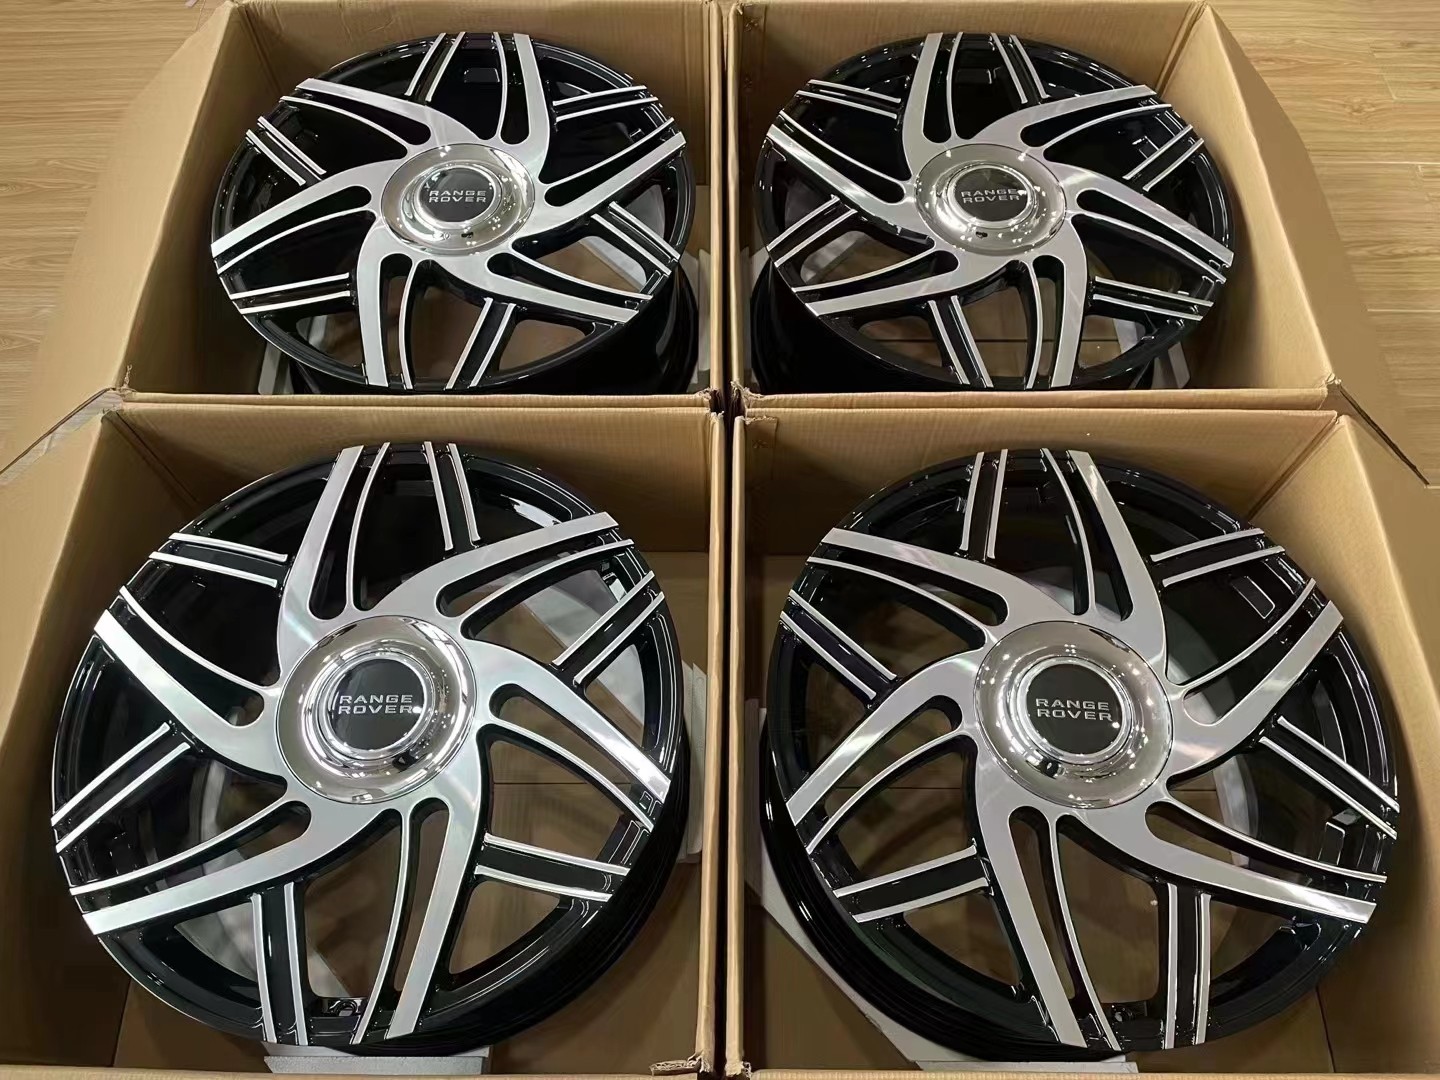 Forged aluminum wheels for Range Rover with Maple leaf style